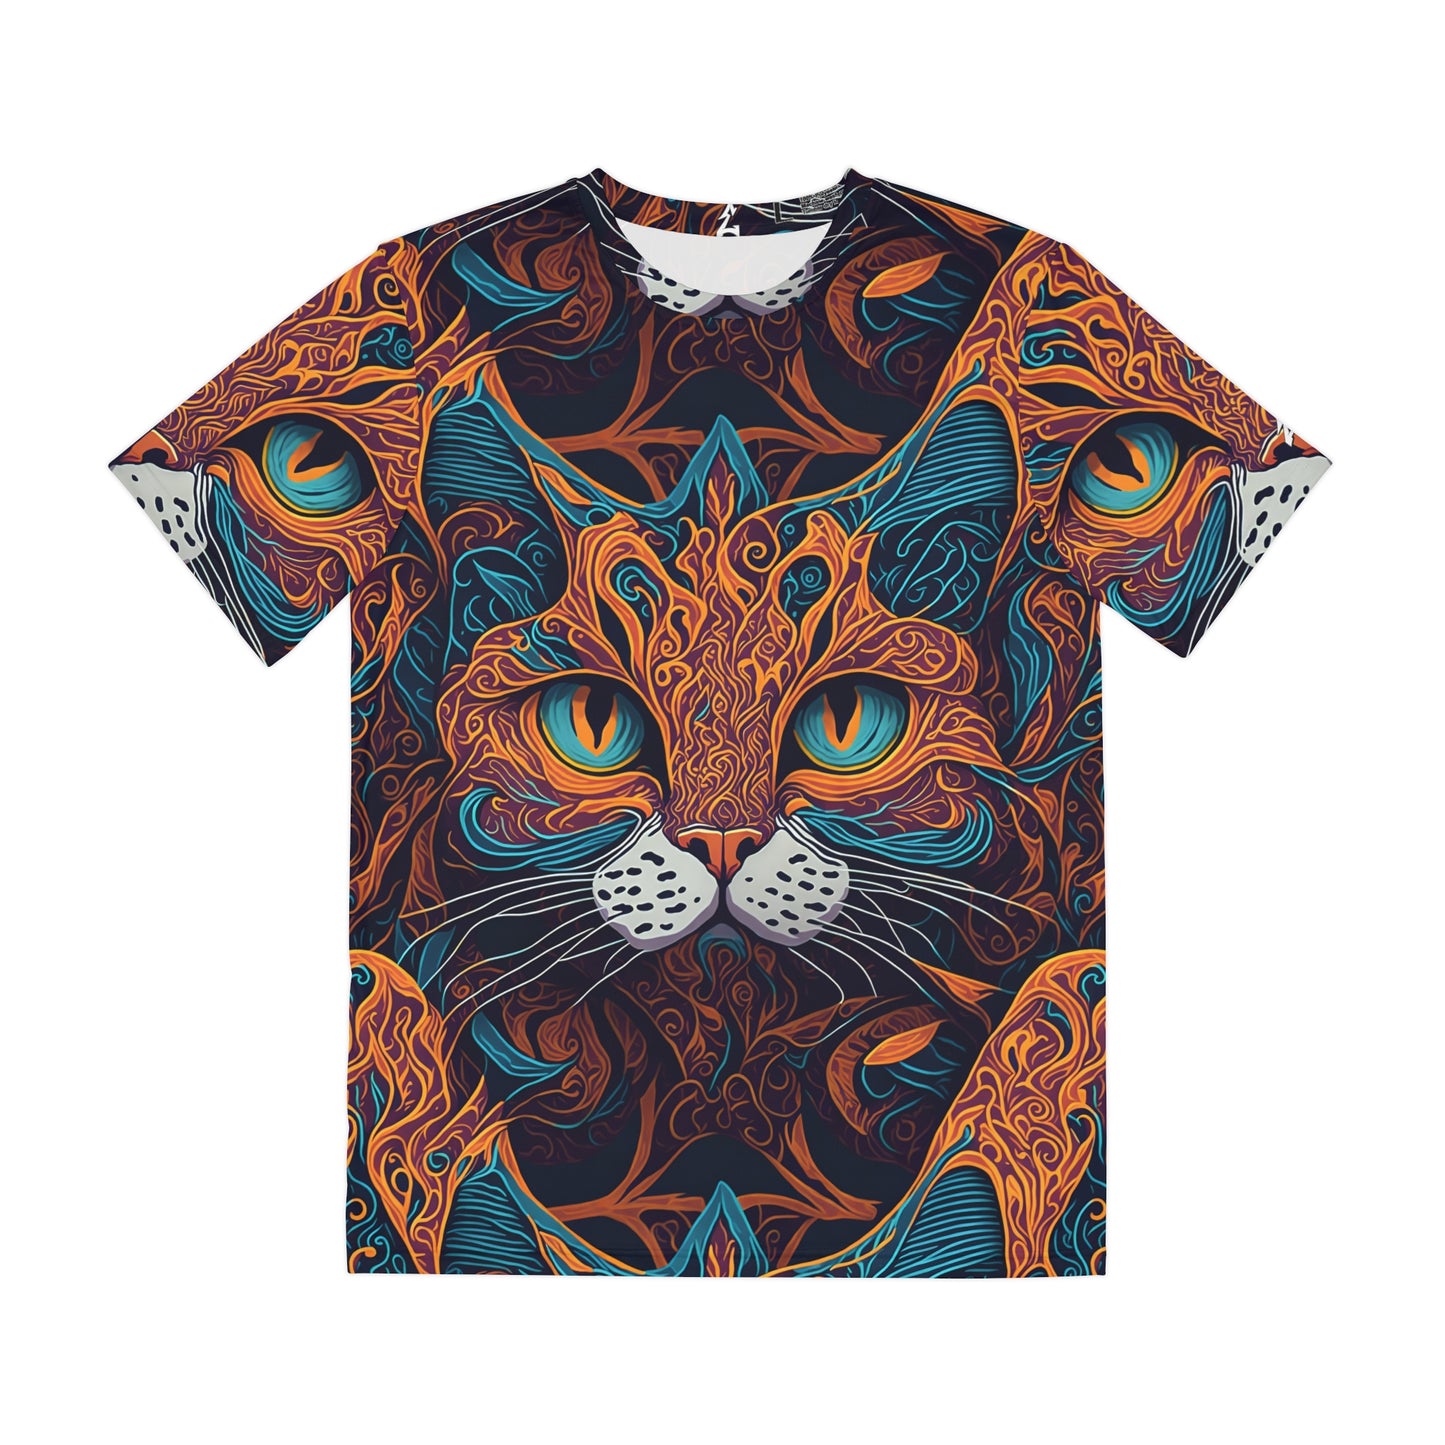 Feline Contrasts: The Fire and Ice Cat